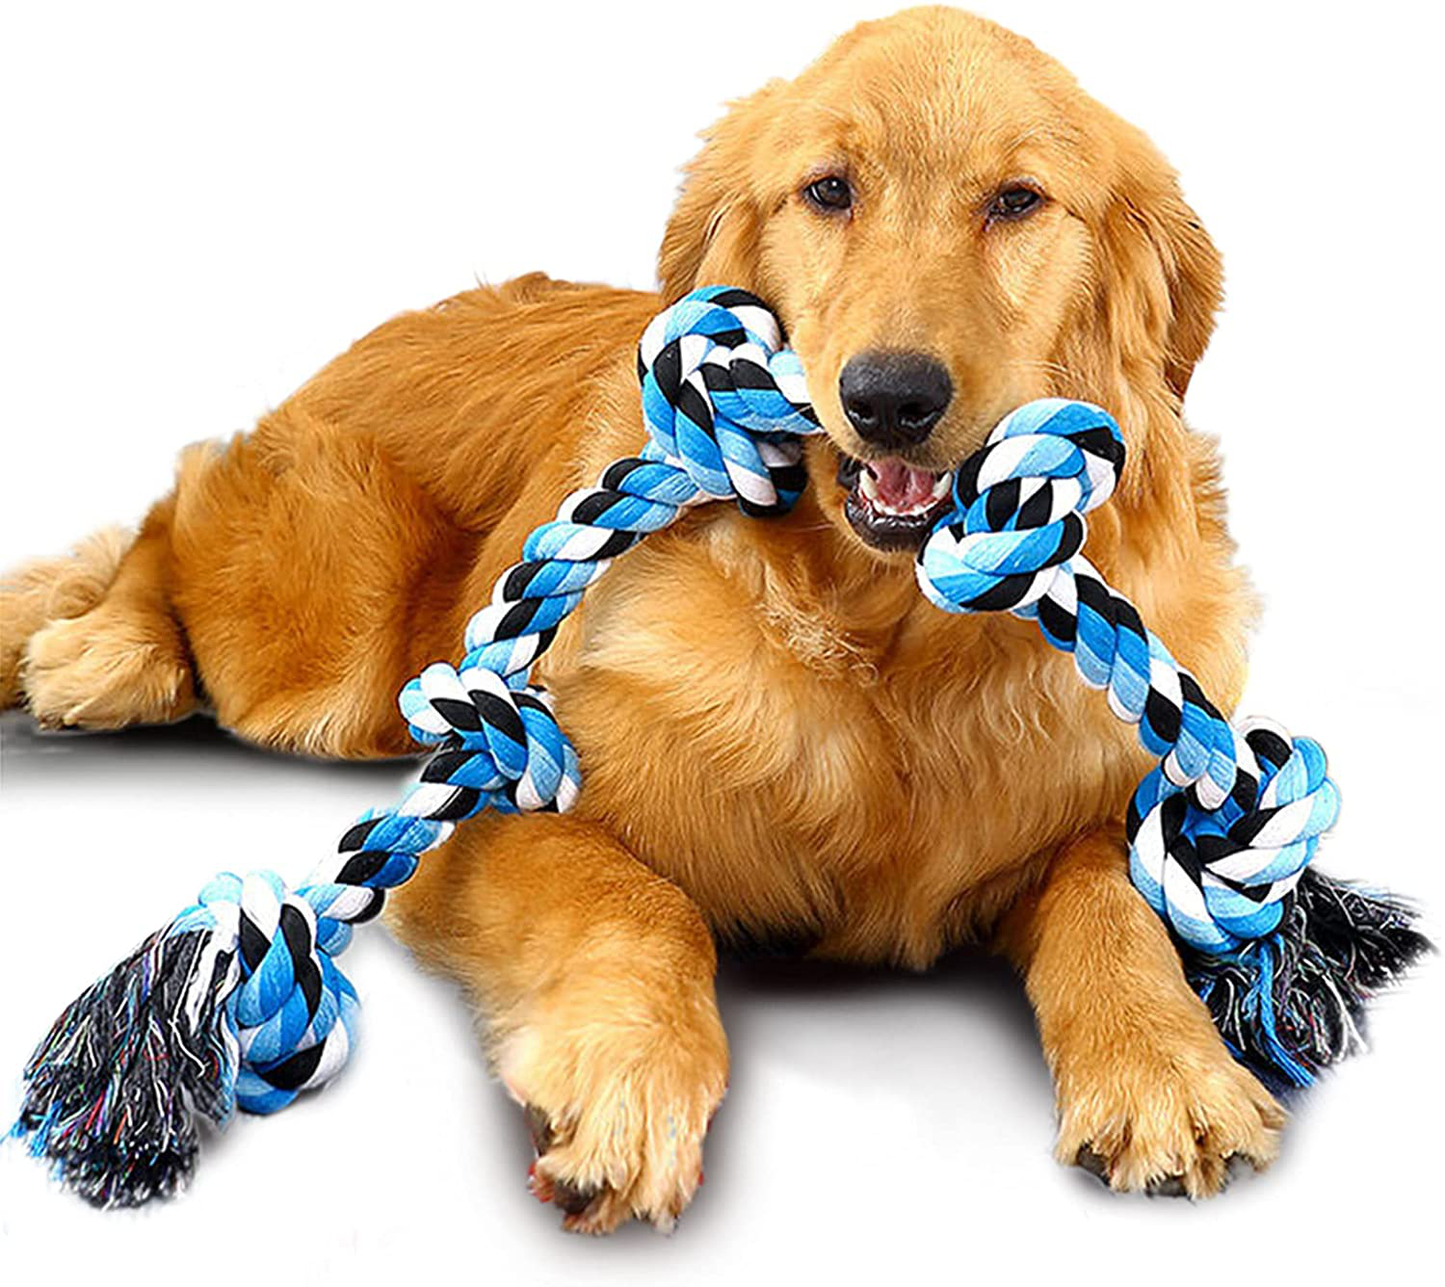 JR MODA Dog Tug Toy for Large Dogs, 3 Feet 5 Knots Indestructible Dog Rope Toy for Aggressive Chewers, Dog Chew Toys Tough Nature Cotton for Medium and Large Breed